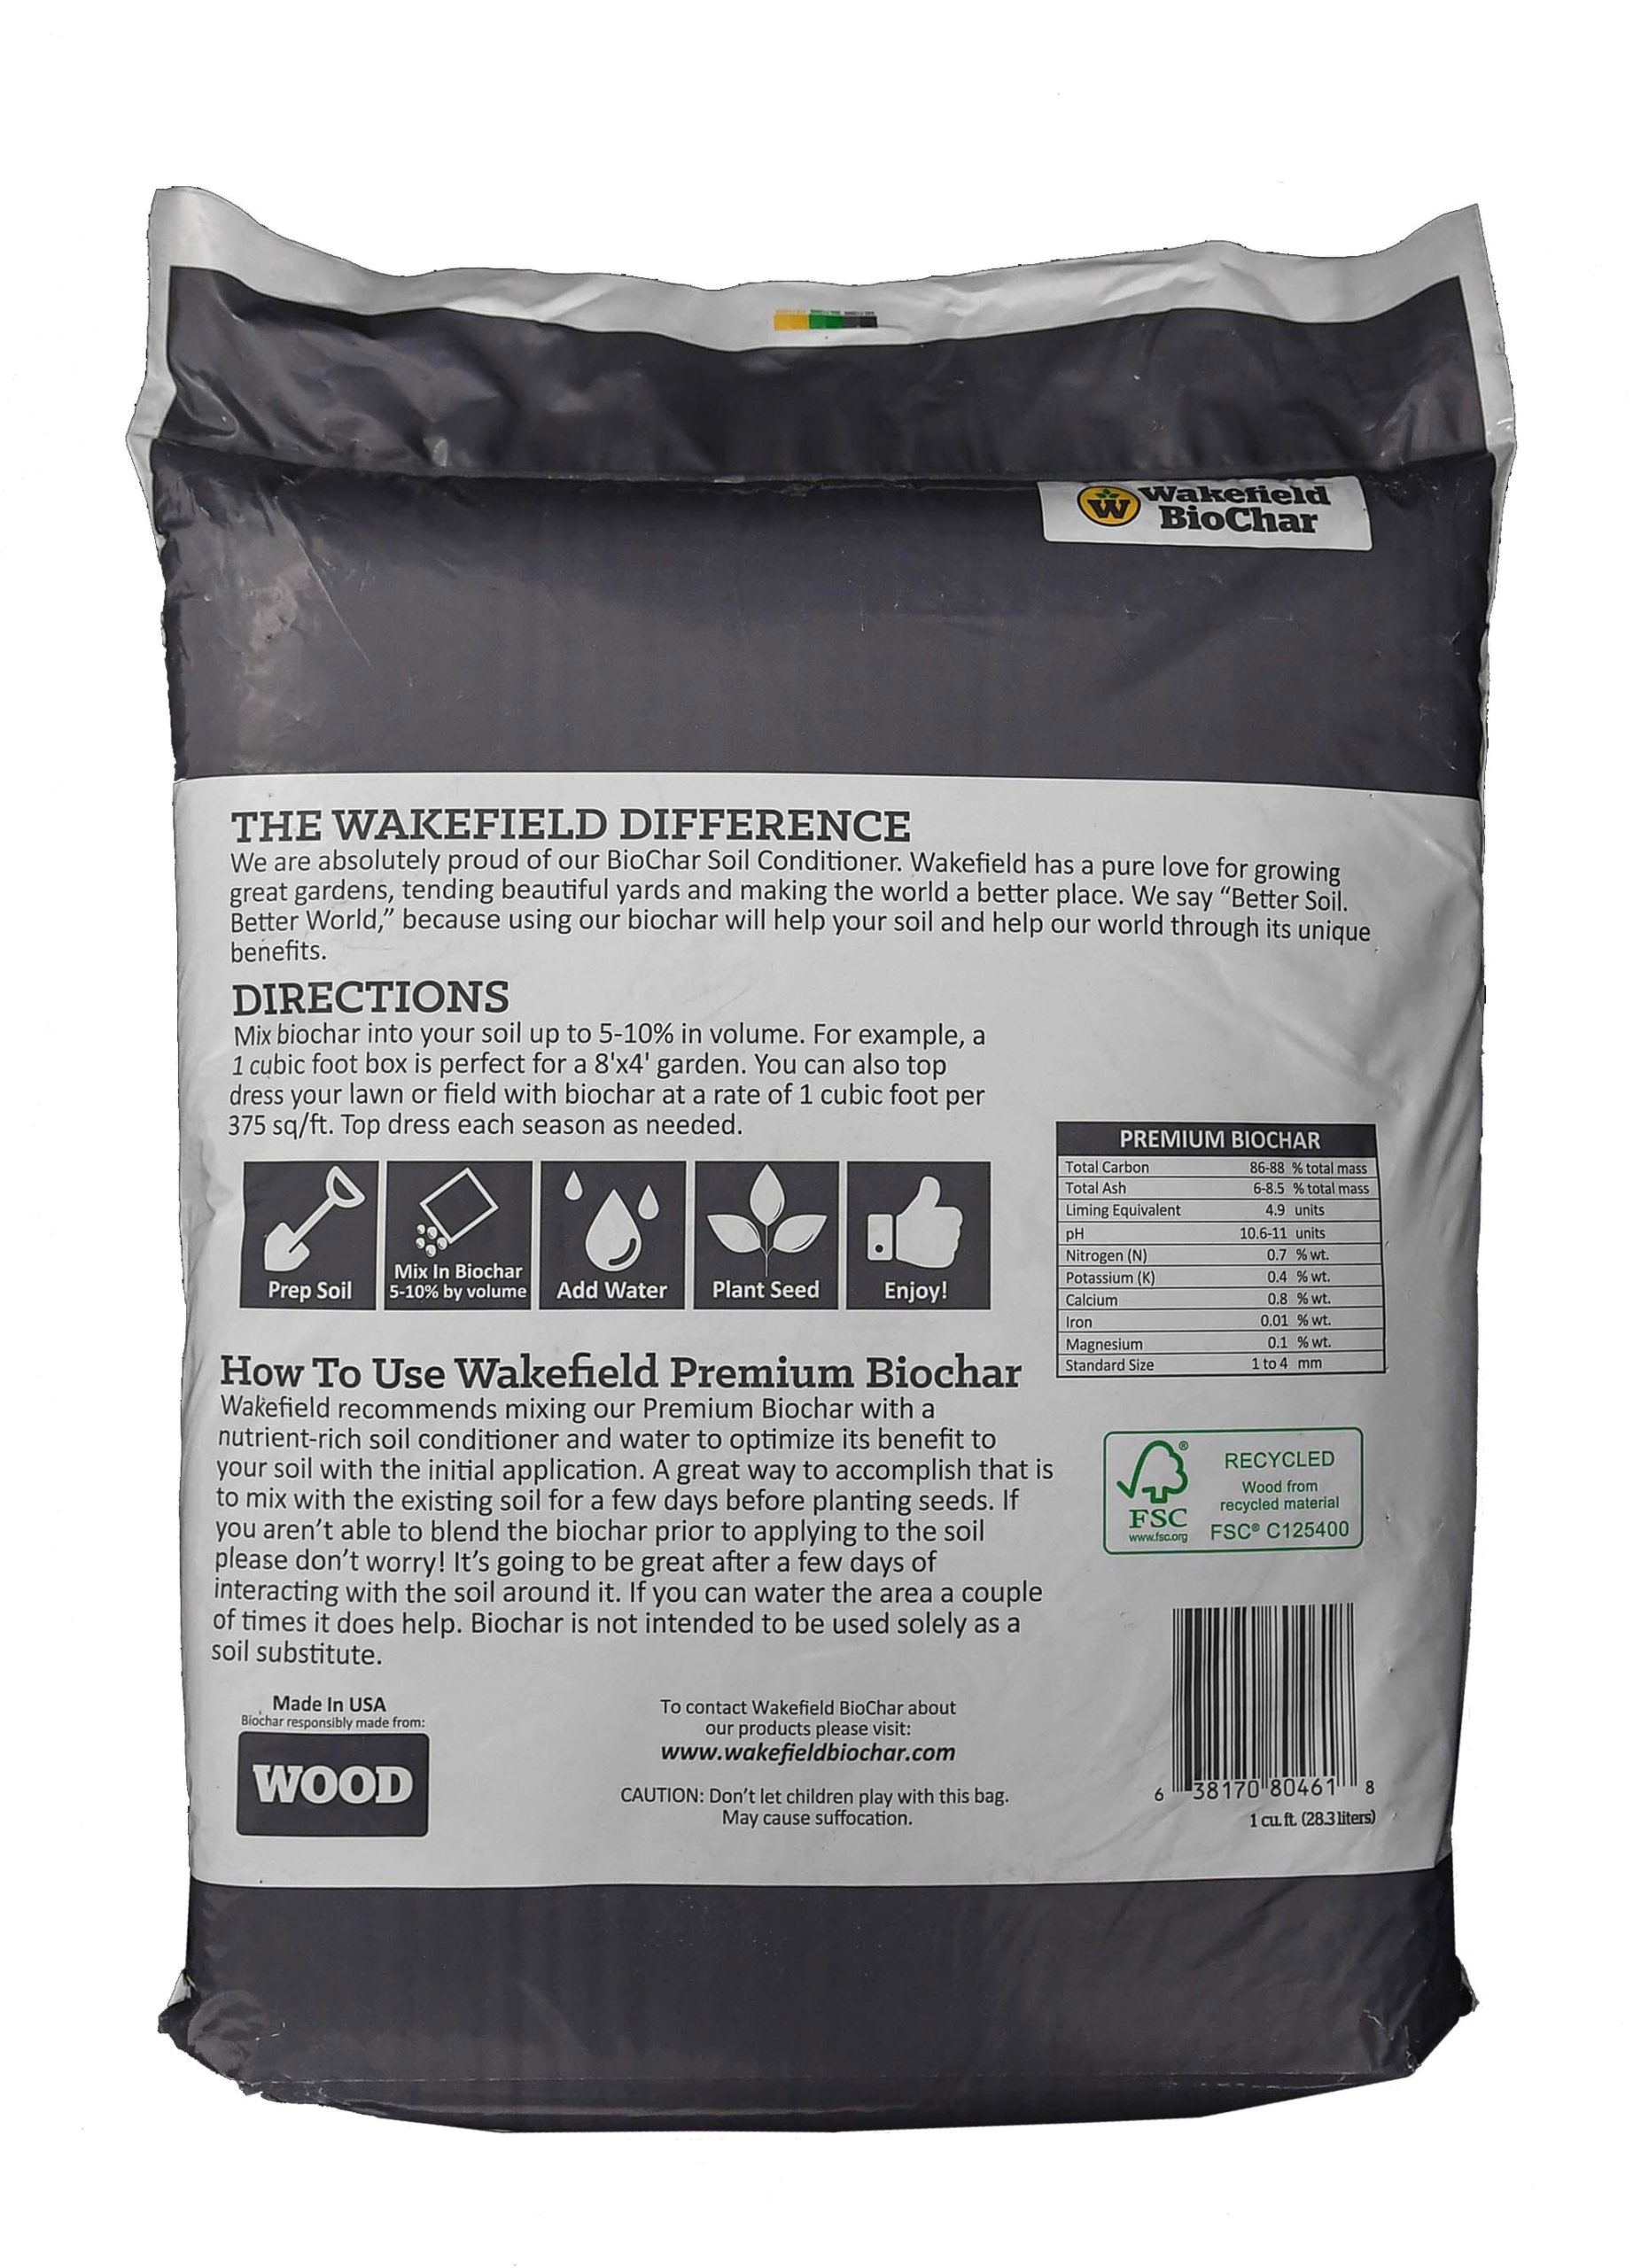 Activated Charcoal for Plants, Horticultural Charcoal Potting Mix 3.5 pounds 1 Gallon Lawns – Organic Bio Char for Raised Bed & Vegetable Gardens Wakefield BioChar – Premium Soil Conditioner 